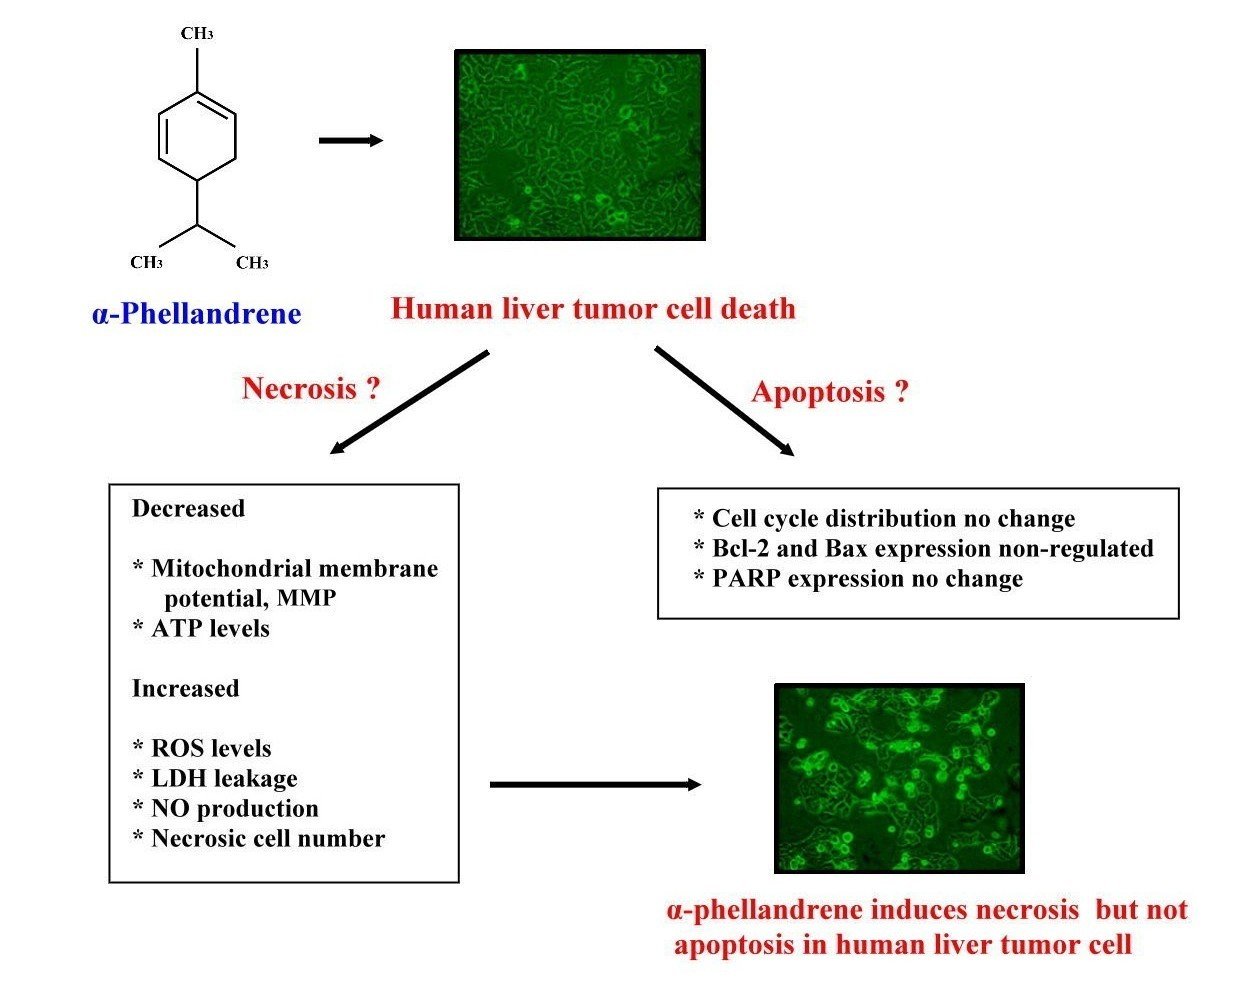 Induction of Necrosis in Human Liver Tumor Cells by α-Phellandrene